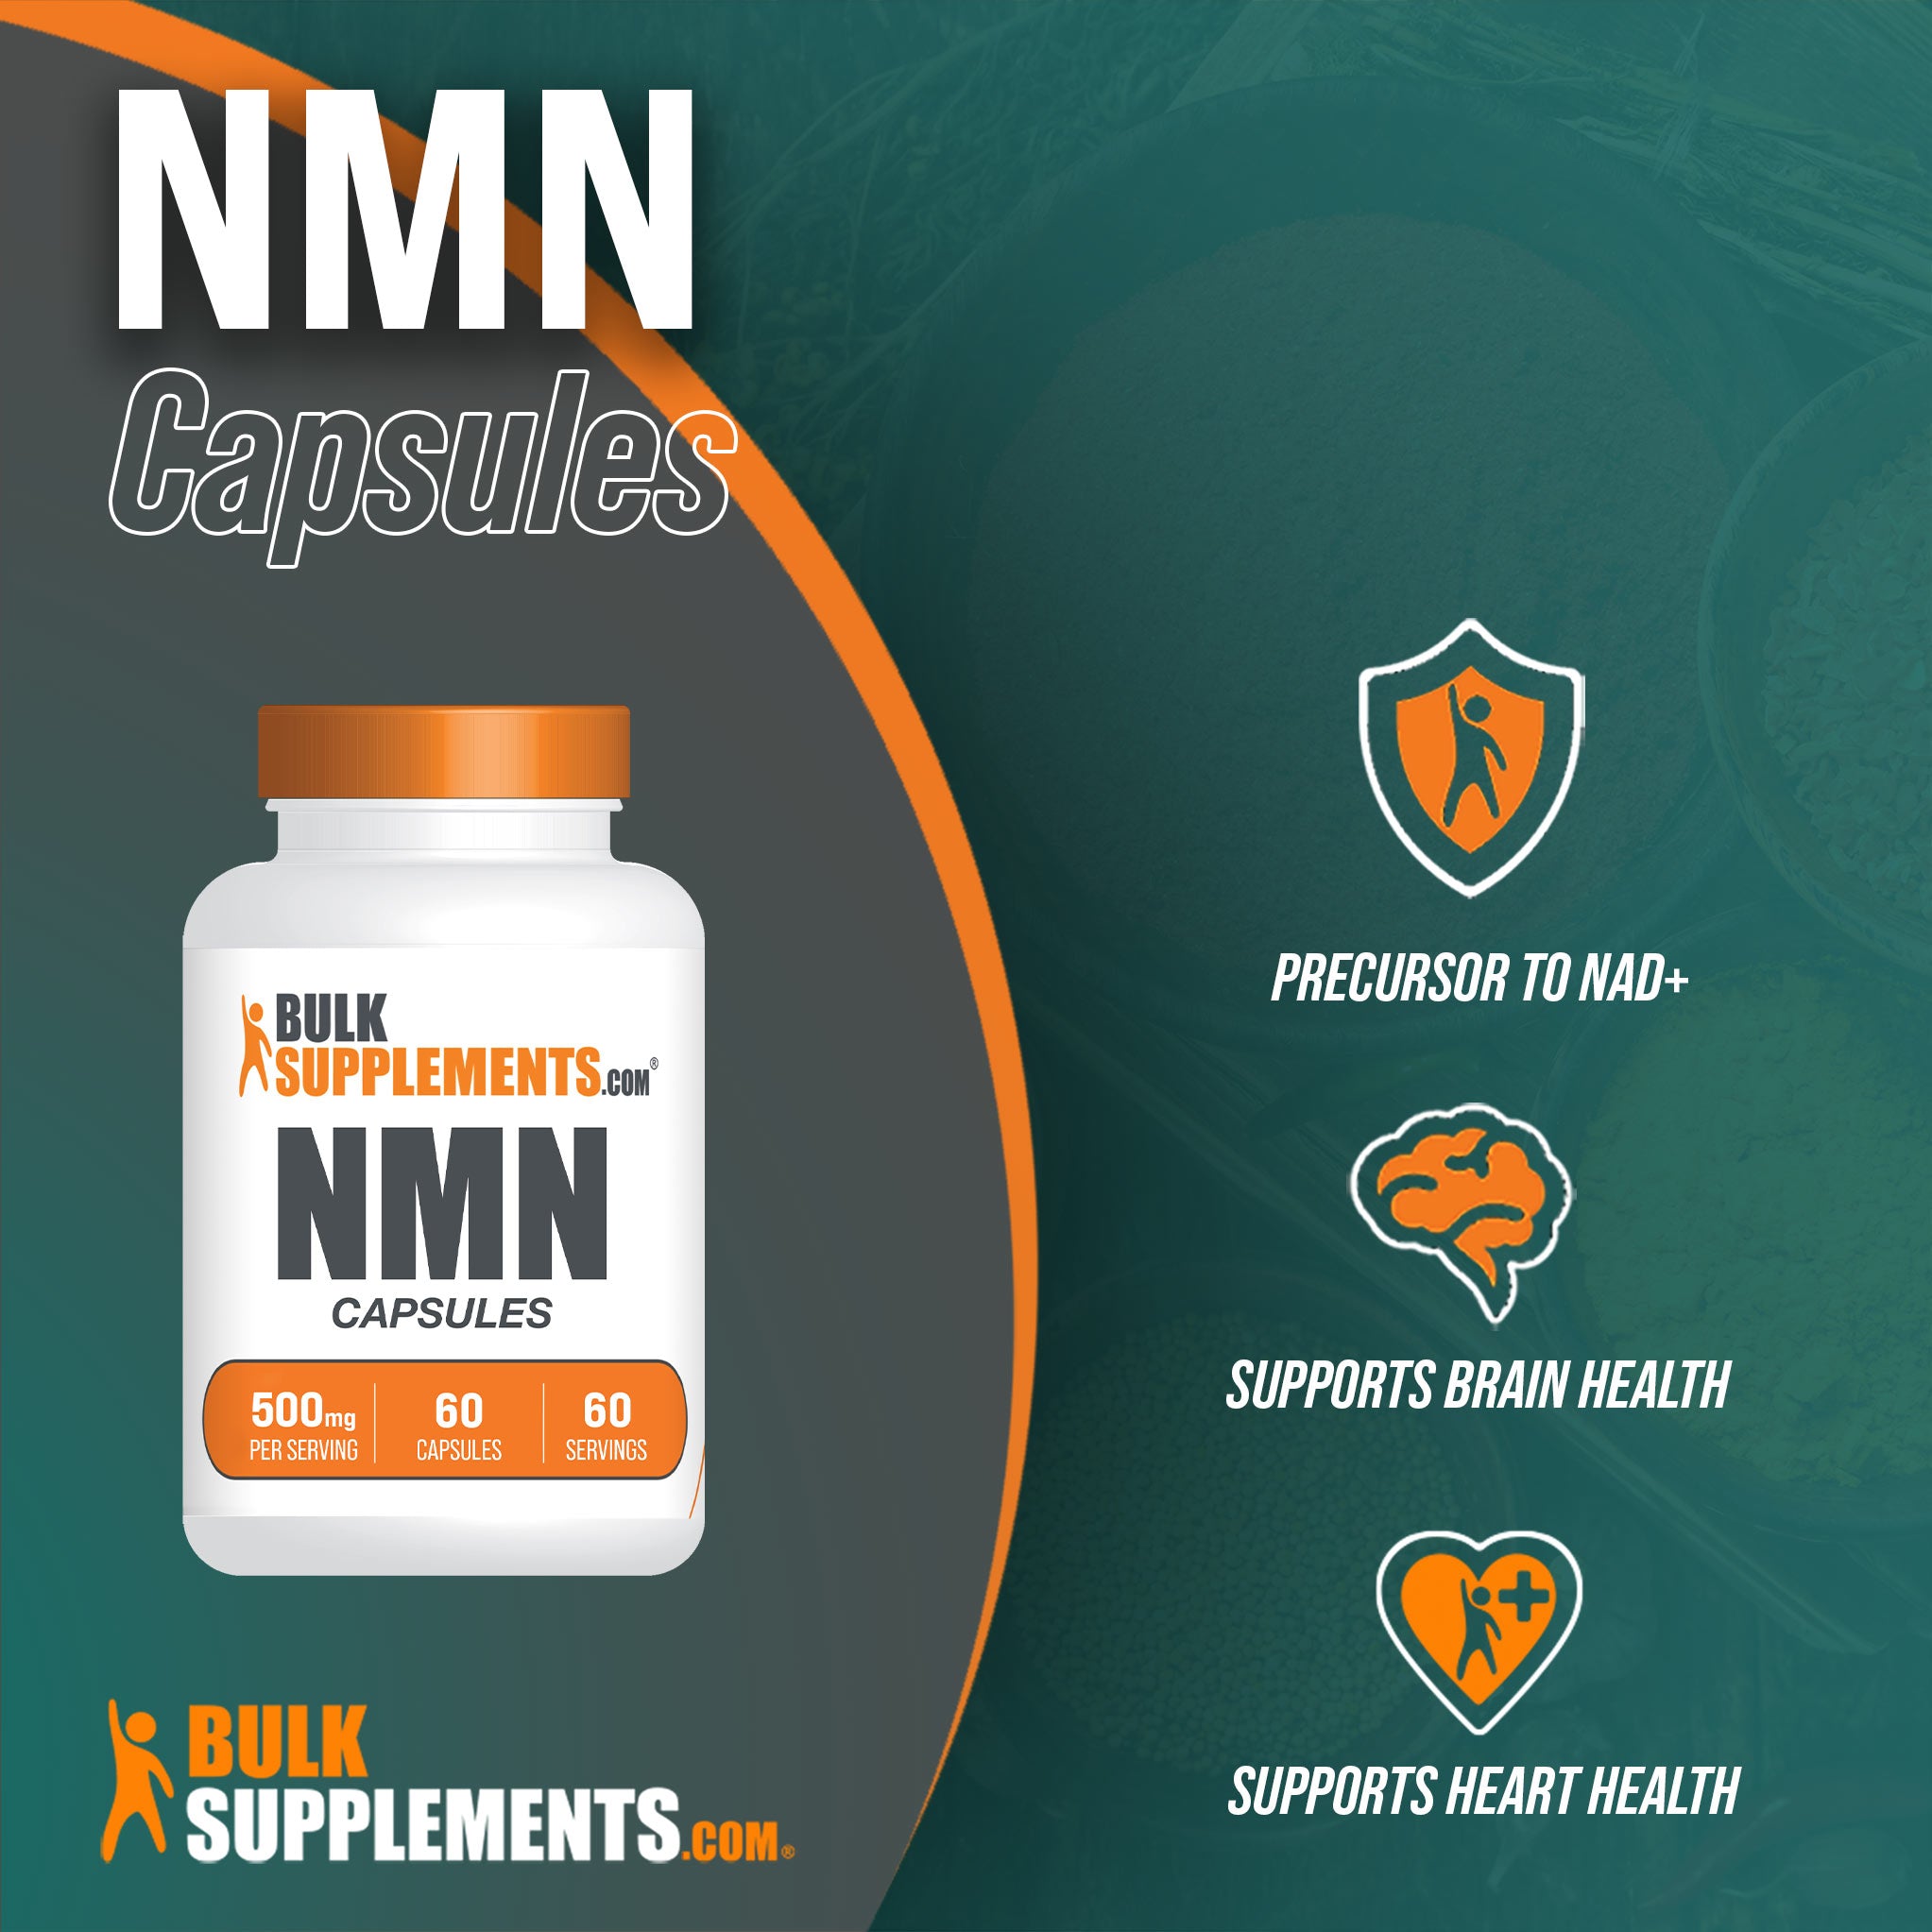 Benefits of NMN: precursor to NAD+, supports brain health, supports heart health